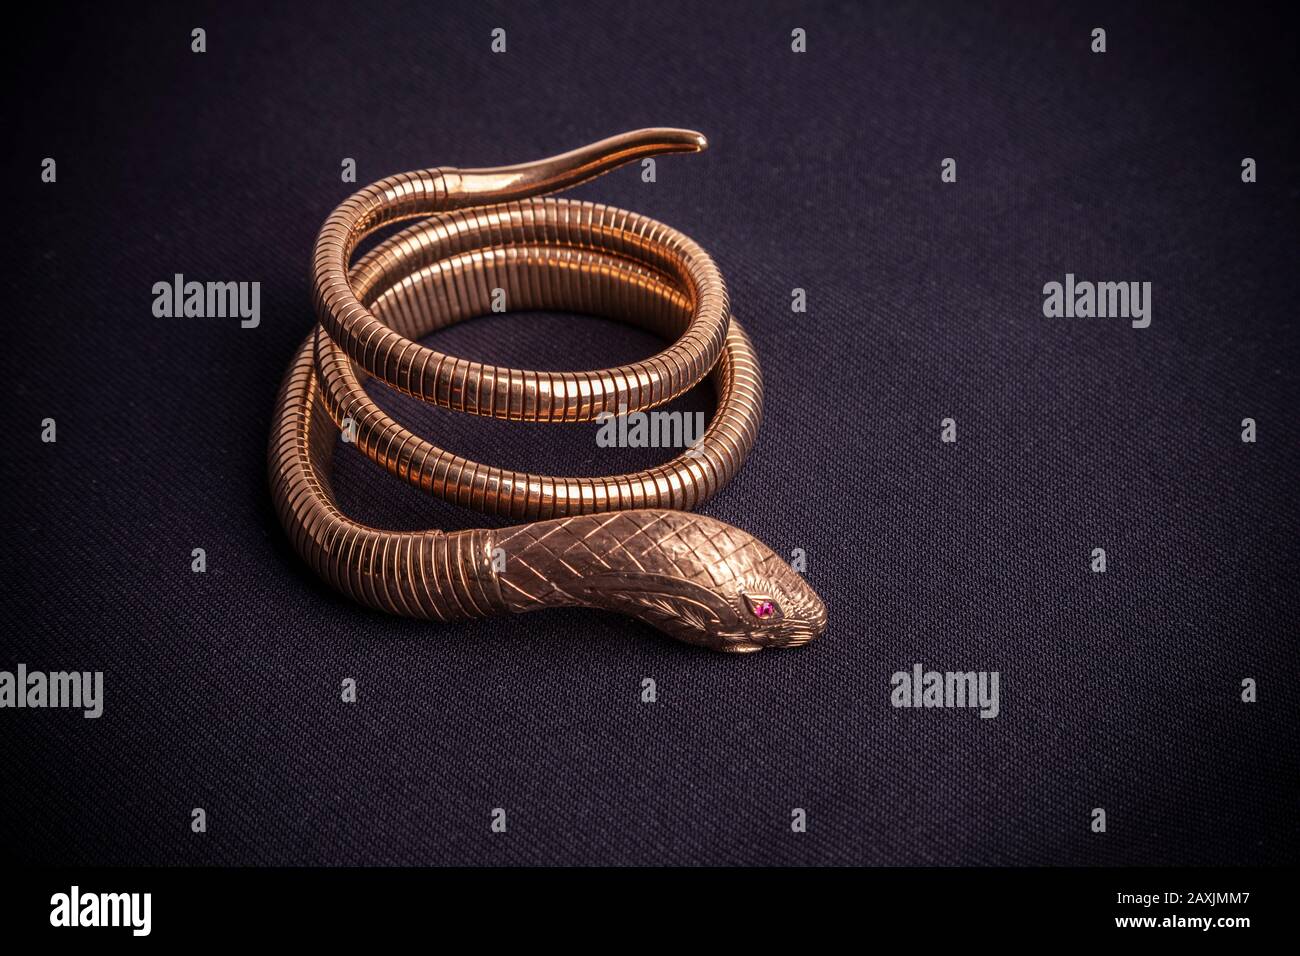 Gold Egyptian Revival style armband, in the shape of a snake with Ruby eyes on a Black background. Stock Photo